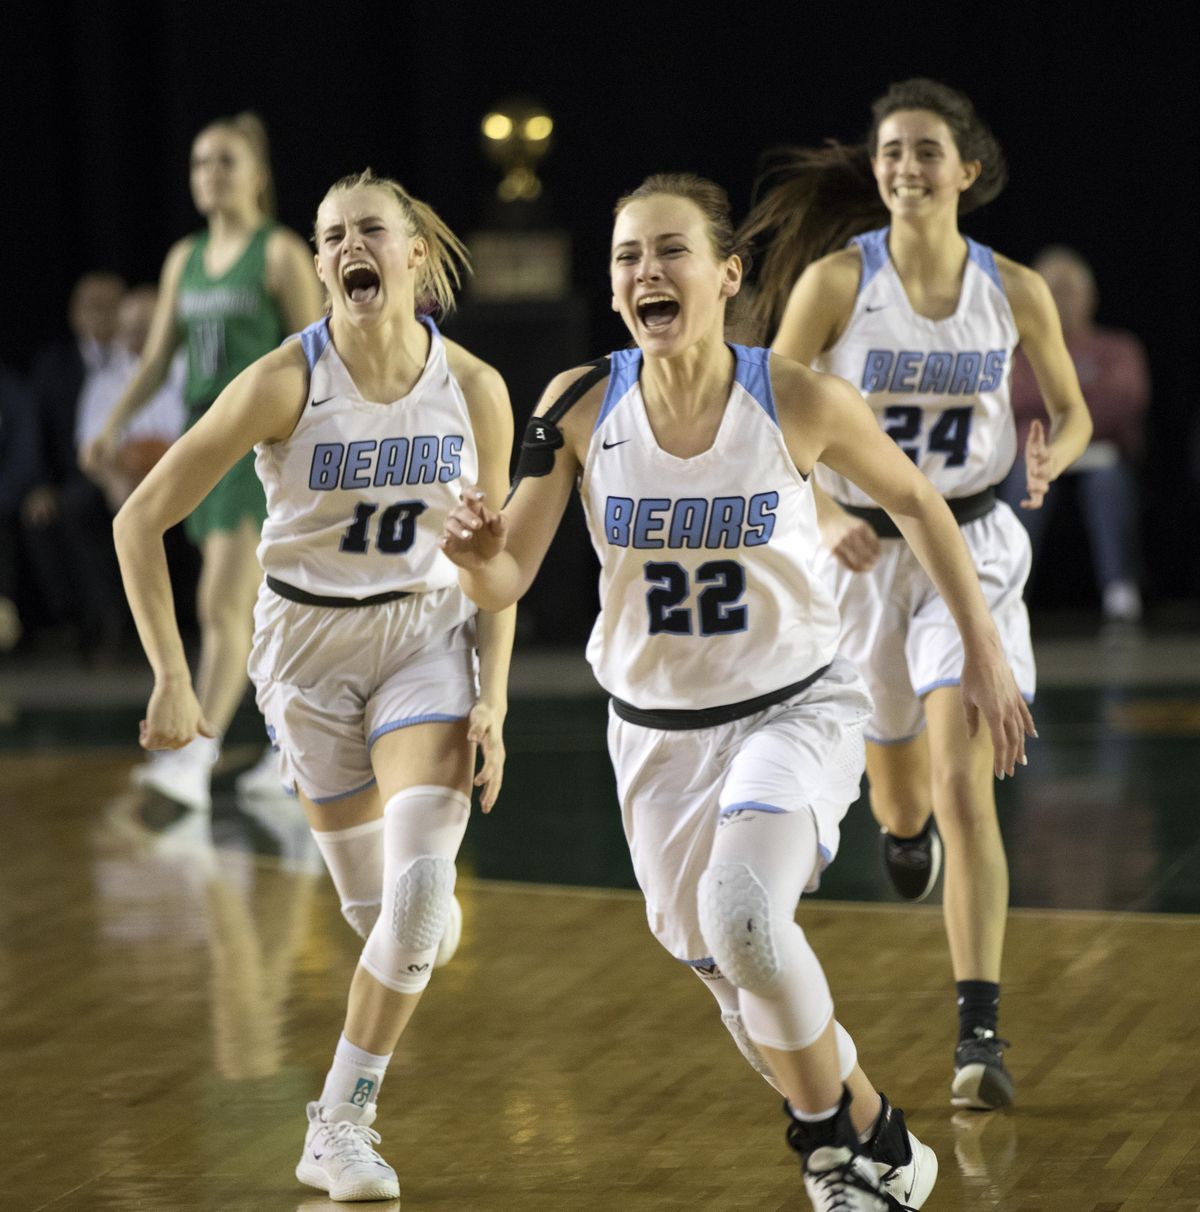 Central Valley players (from left) MJ Bruno, Grace Geldien and Chloe Williams celebrate the State 4A championship win over Woodinville on Saturday, March 7, 2020, in Tacoma, Wash. All three players return this season.  (Patrick Hagerty/For The Spokesman-Review)